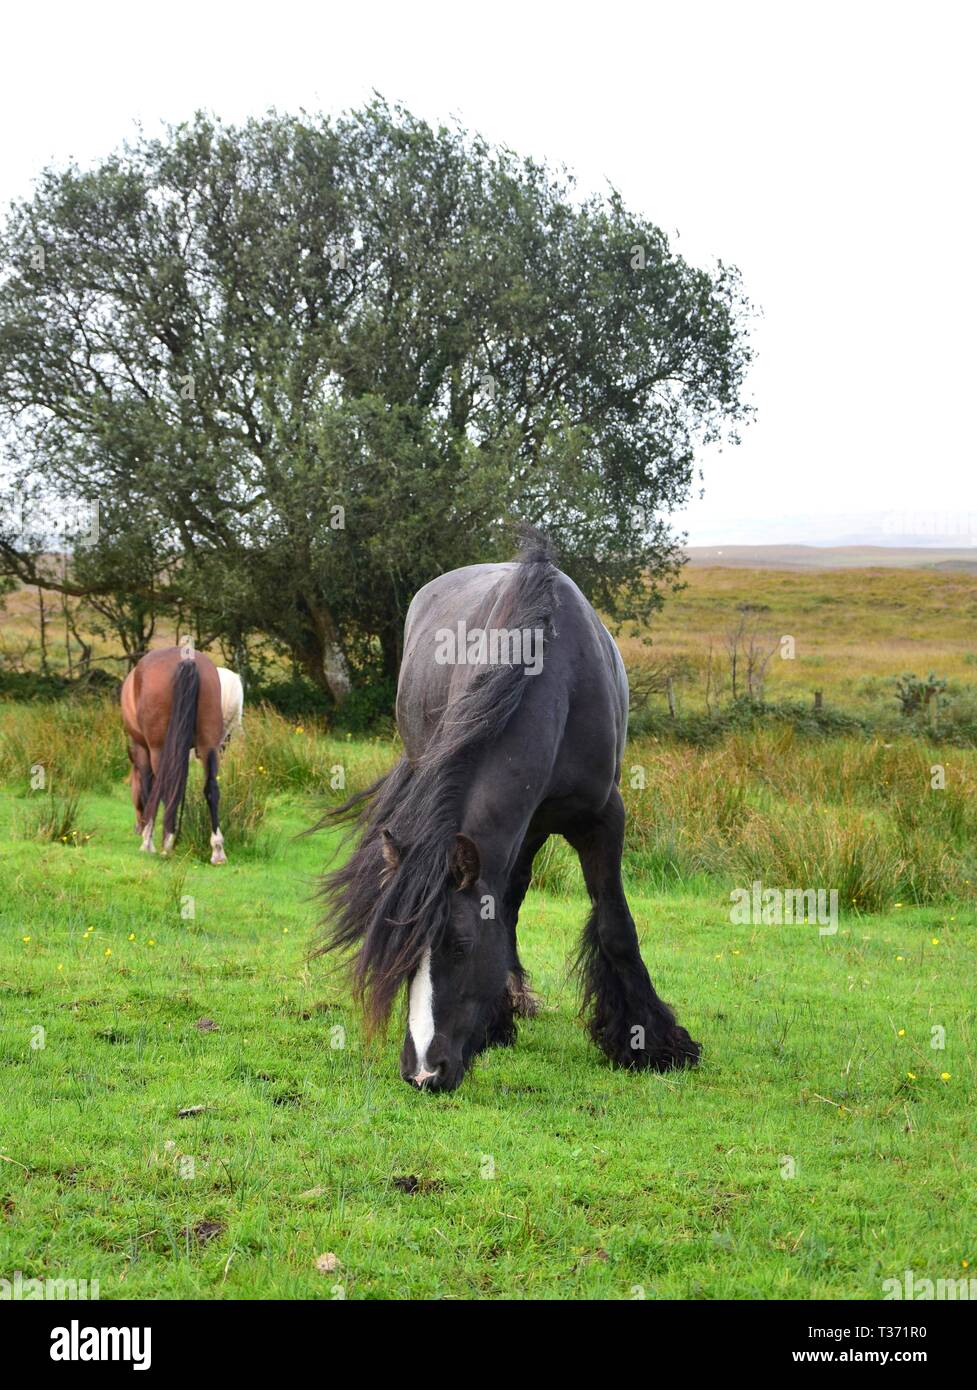 Beautiful grazing black horse with a long mane and long feathering. Another horse and a tree in the background. Stock Photo